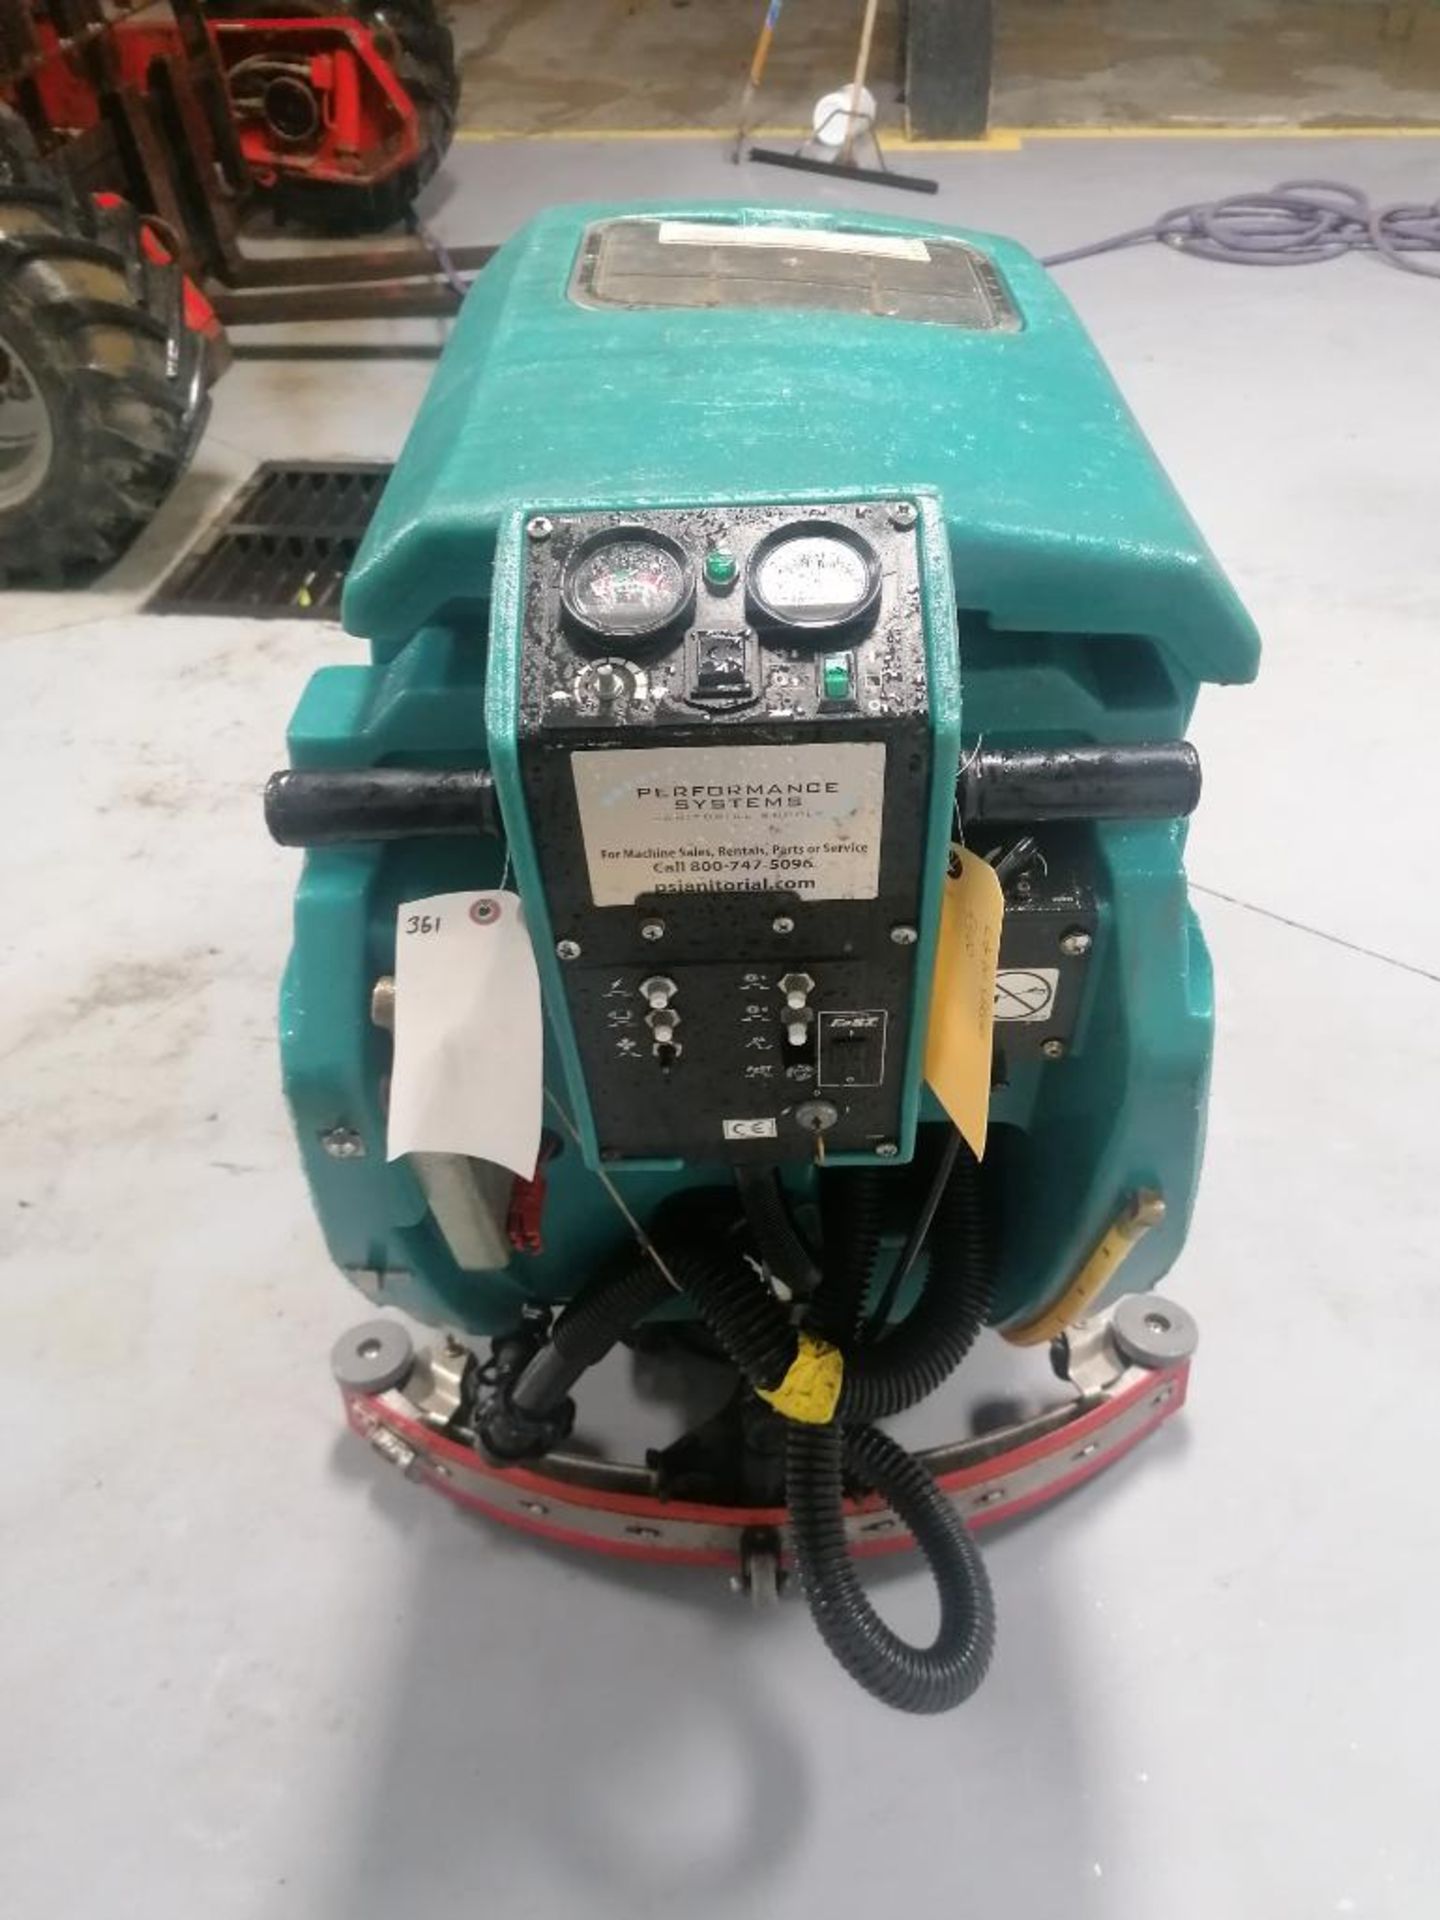 Tennant 5400 Floor Scrubber, Serial #540010229139 24 V, 21 Hours. Located in Mt. Pleasant, IA. - Image 12 of 19